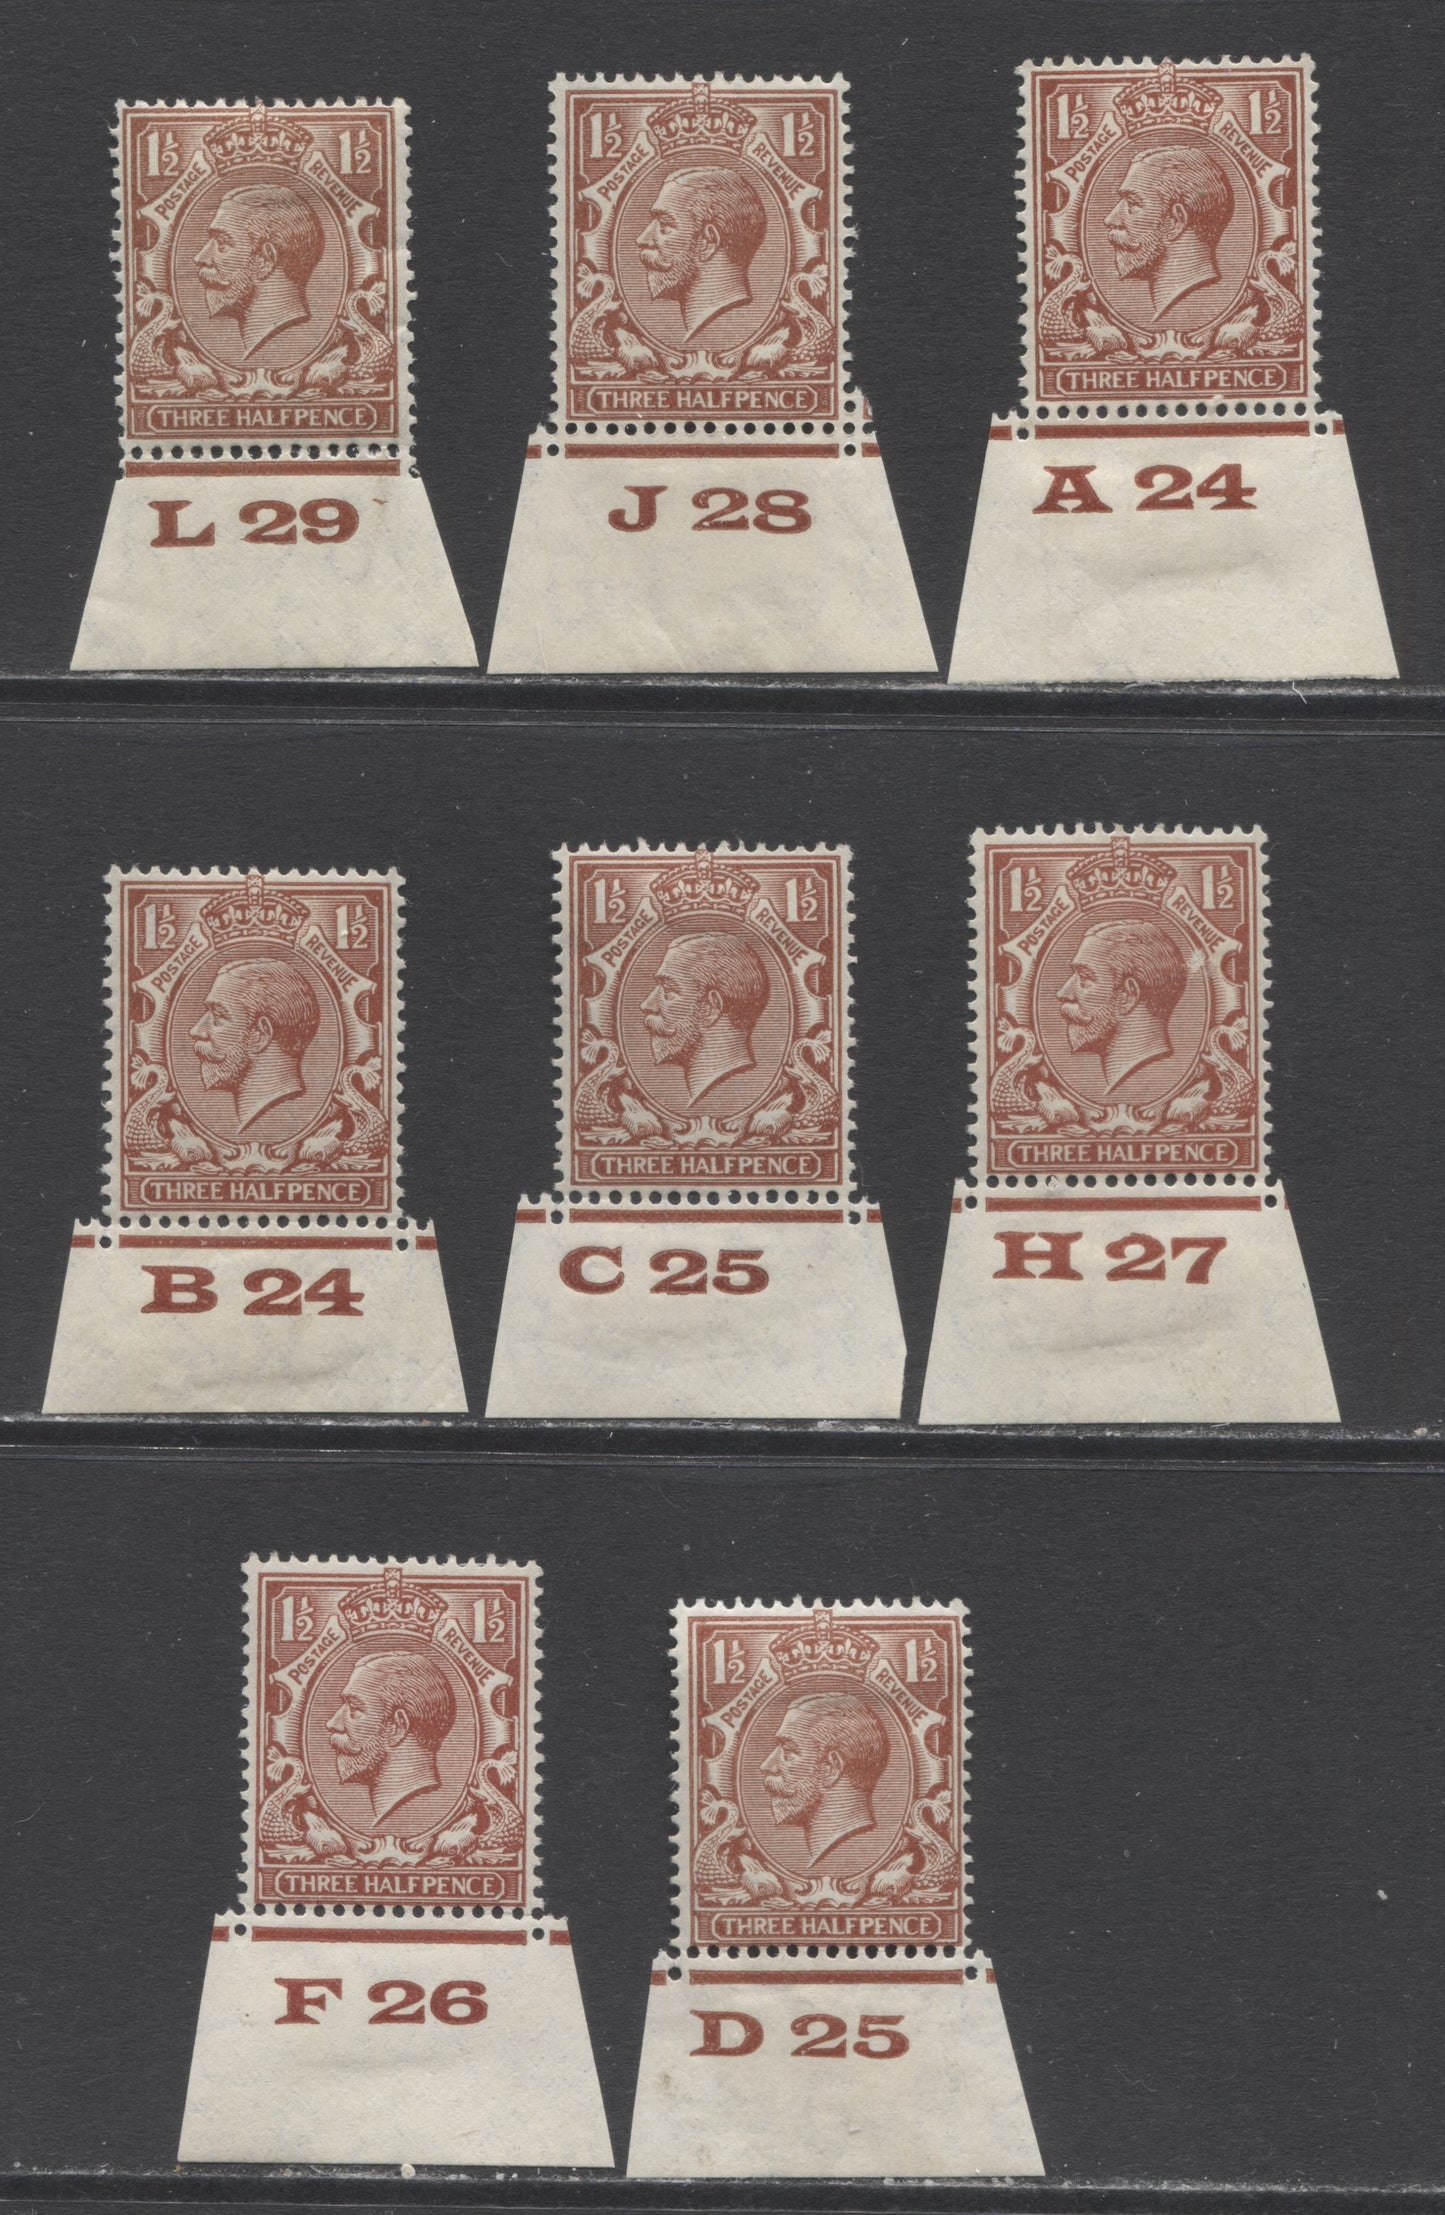 Lot 49 Great Britain SC#189/ 1924-1934 King George V Block Cypher Profile Head Issue, A F/VFOG Range Of Singles, 2017 Scott Cat. $4 USD, Click on Listing to See ALL Pictures